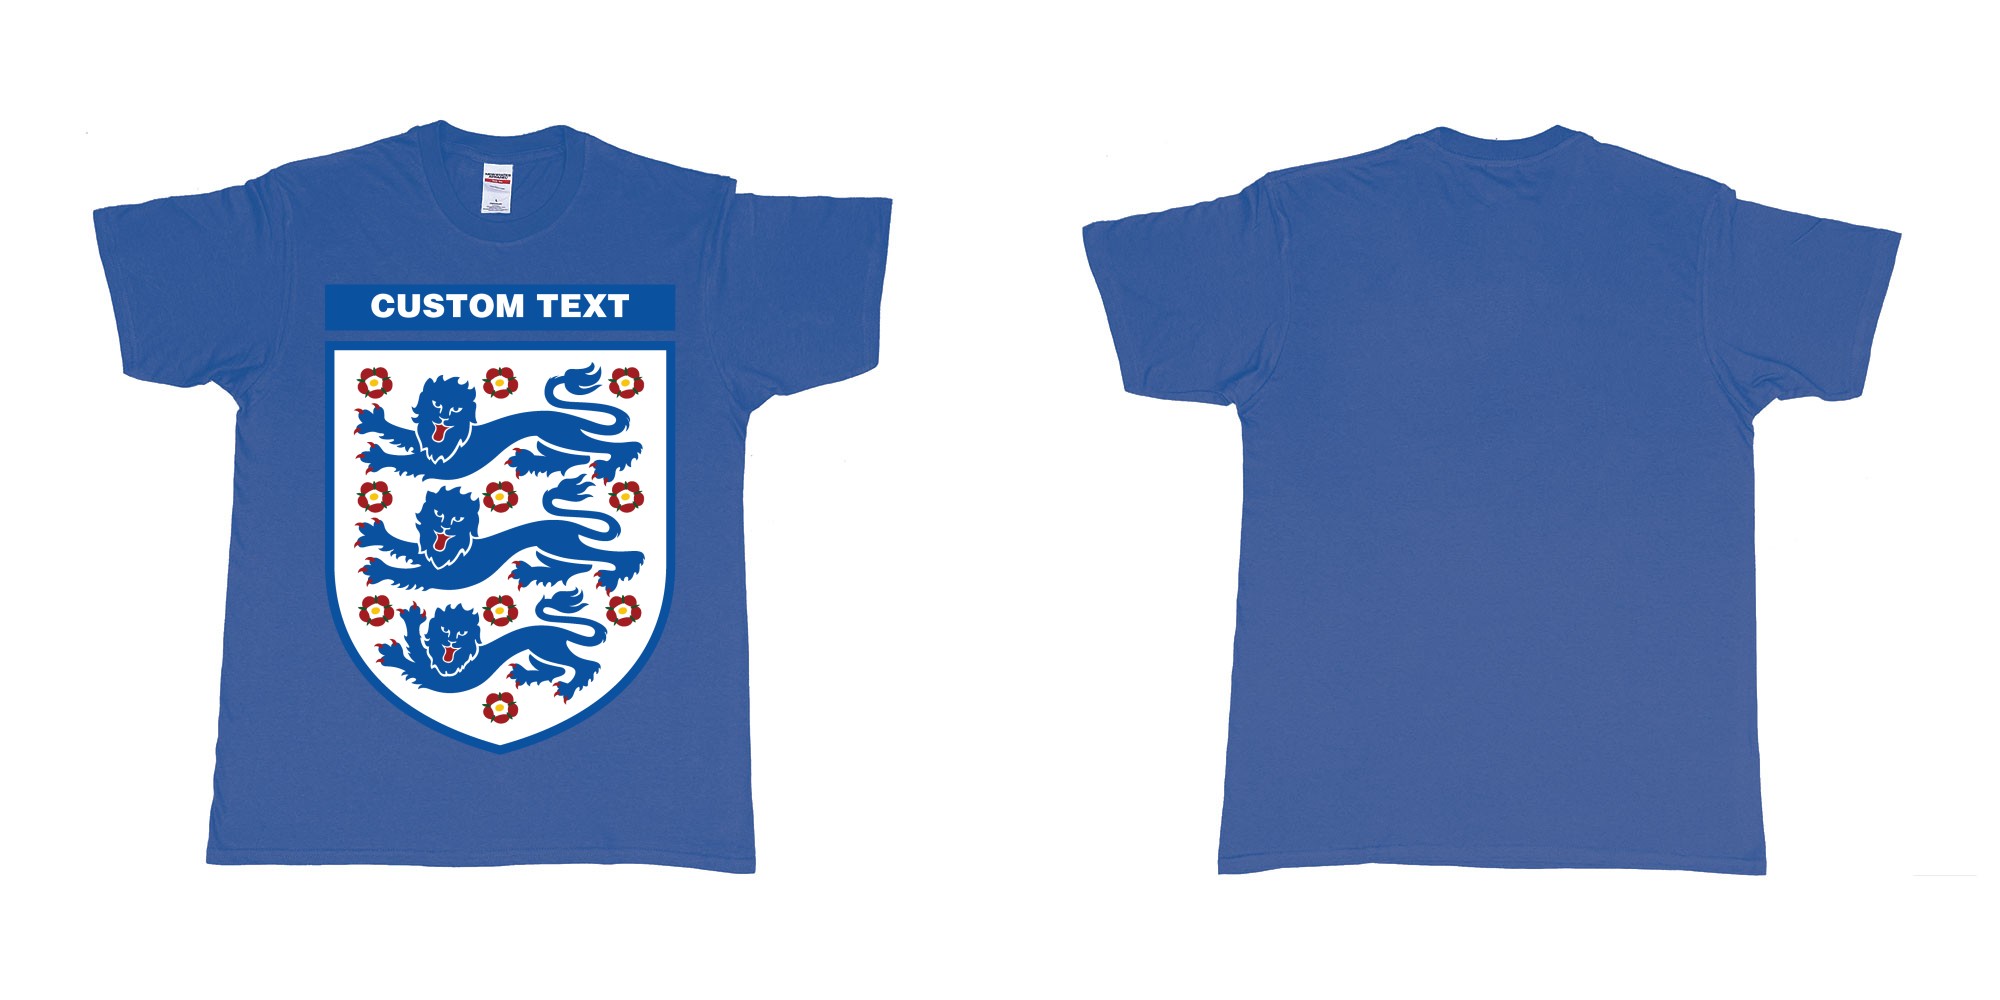 Custom tshirt design england national football team logo in fabric color royal-blue choice your own text made in Bali by The Pirate Way